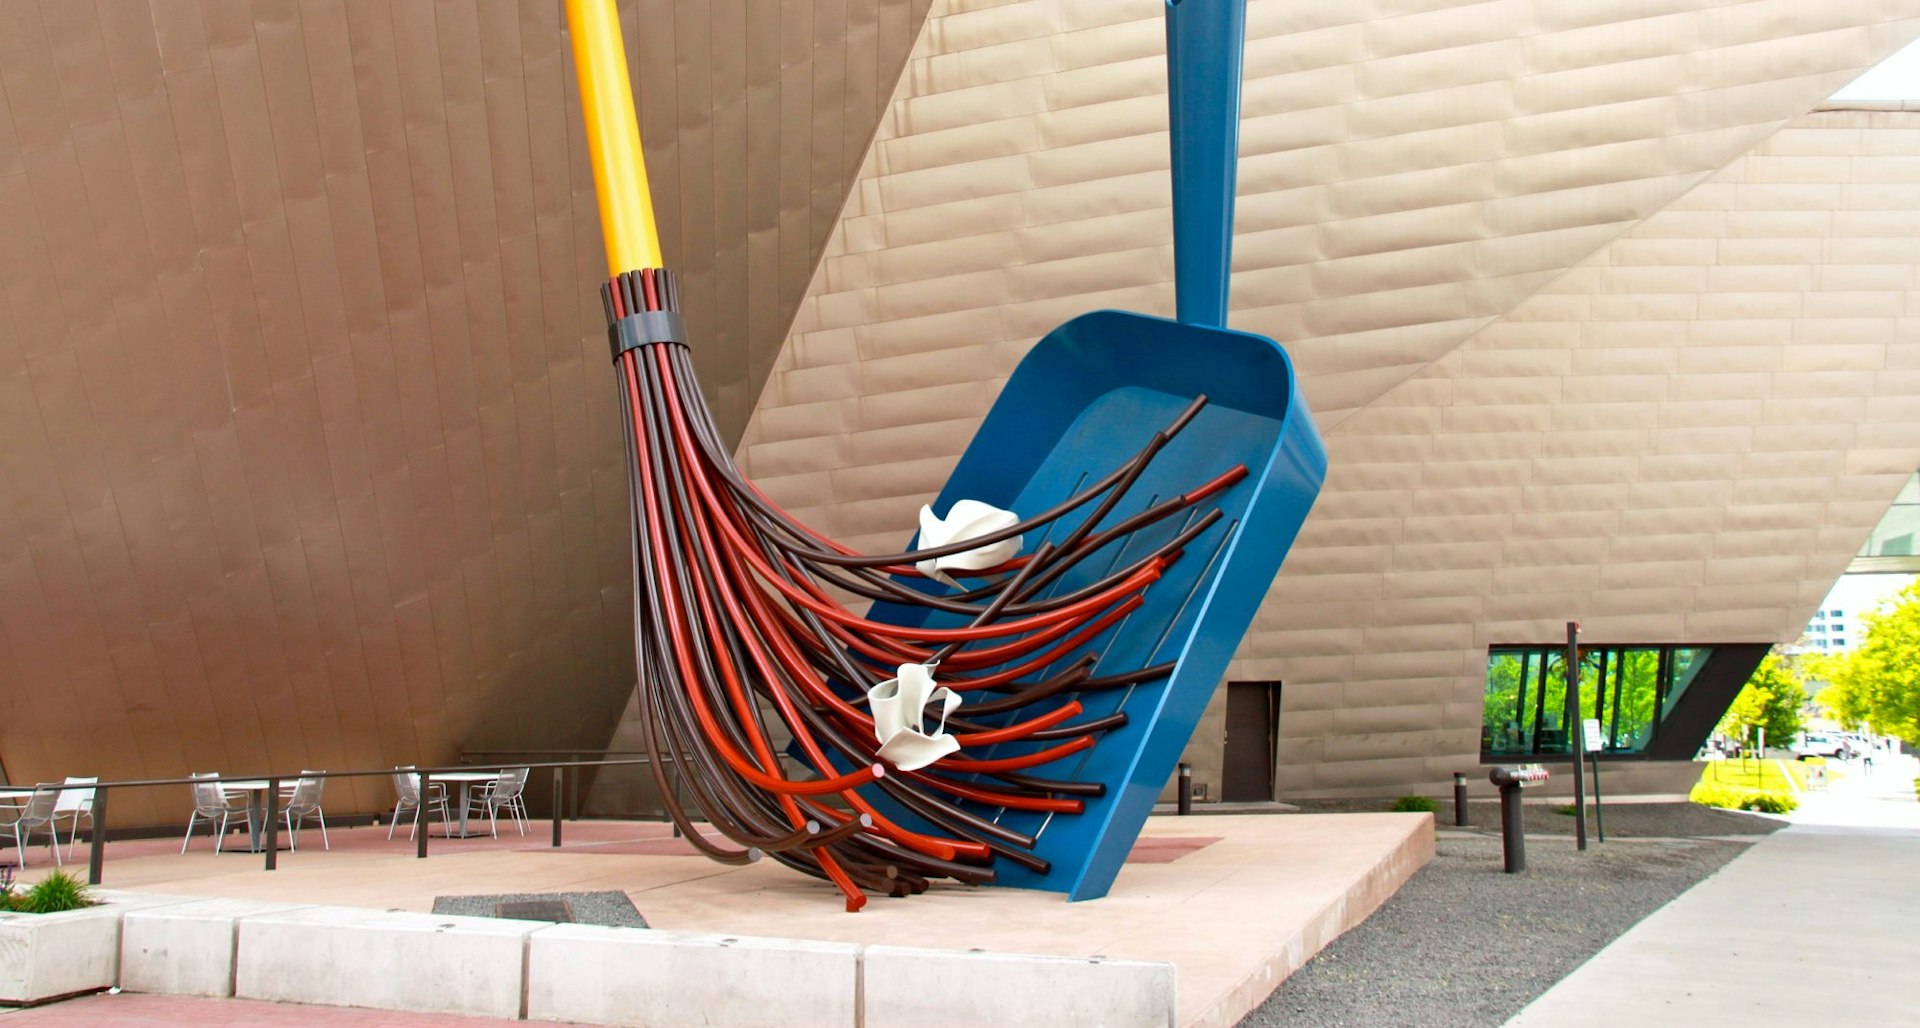 The Big Sweep statue at the Civic Center Cultural Complex in Denver